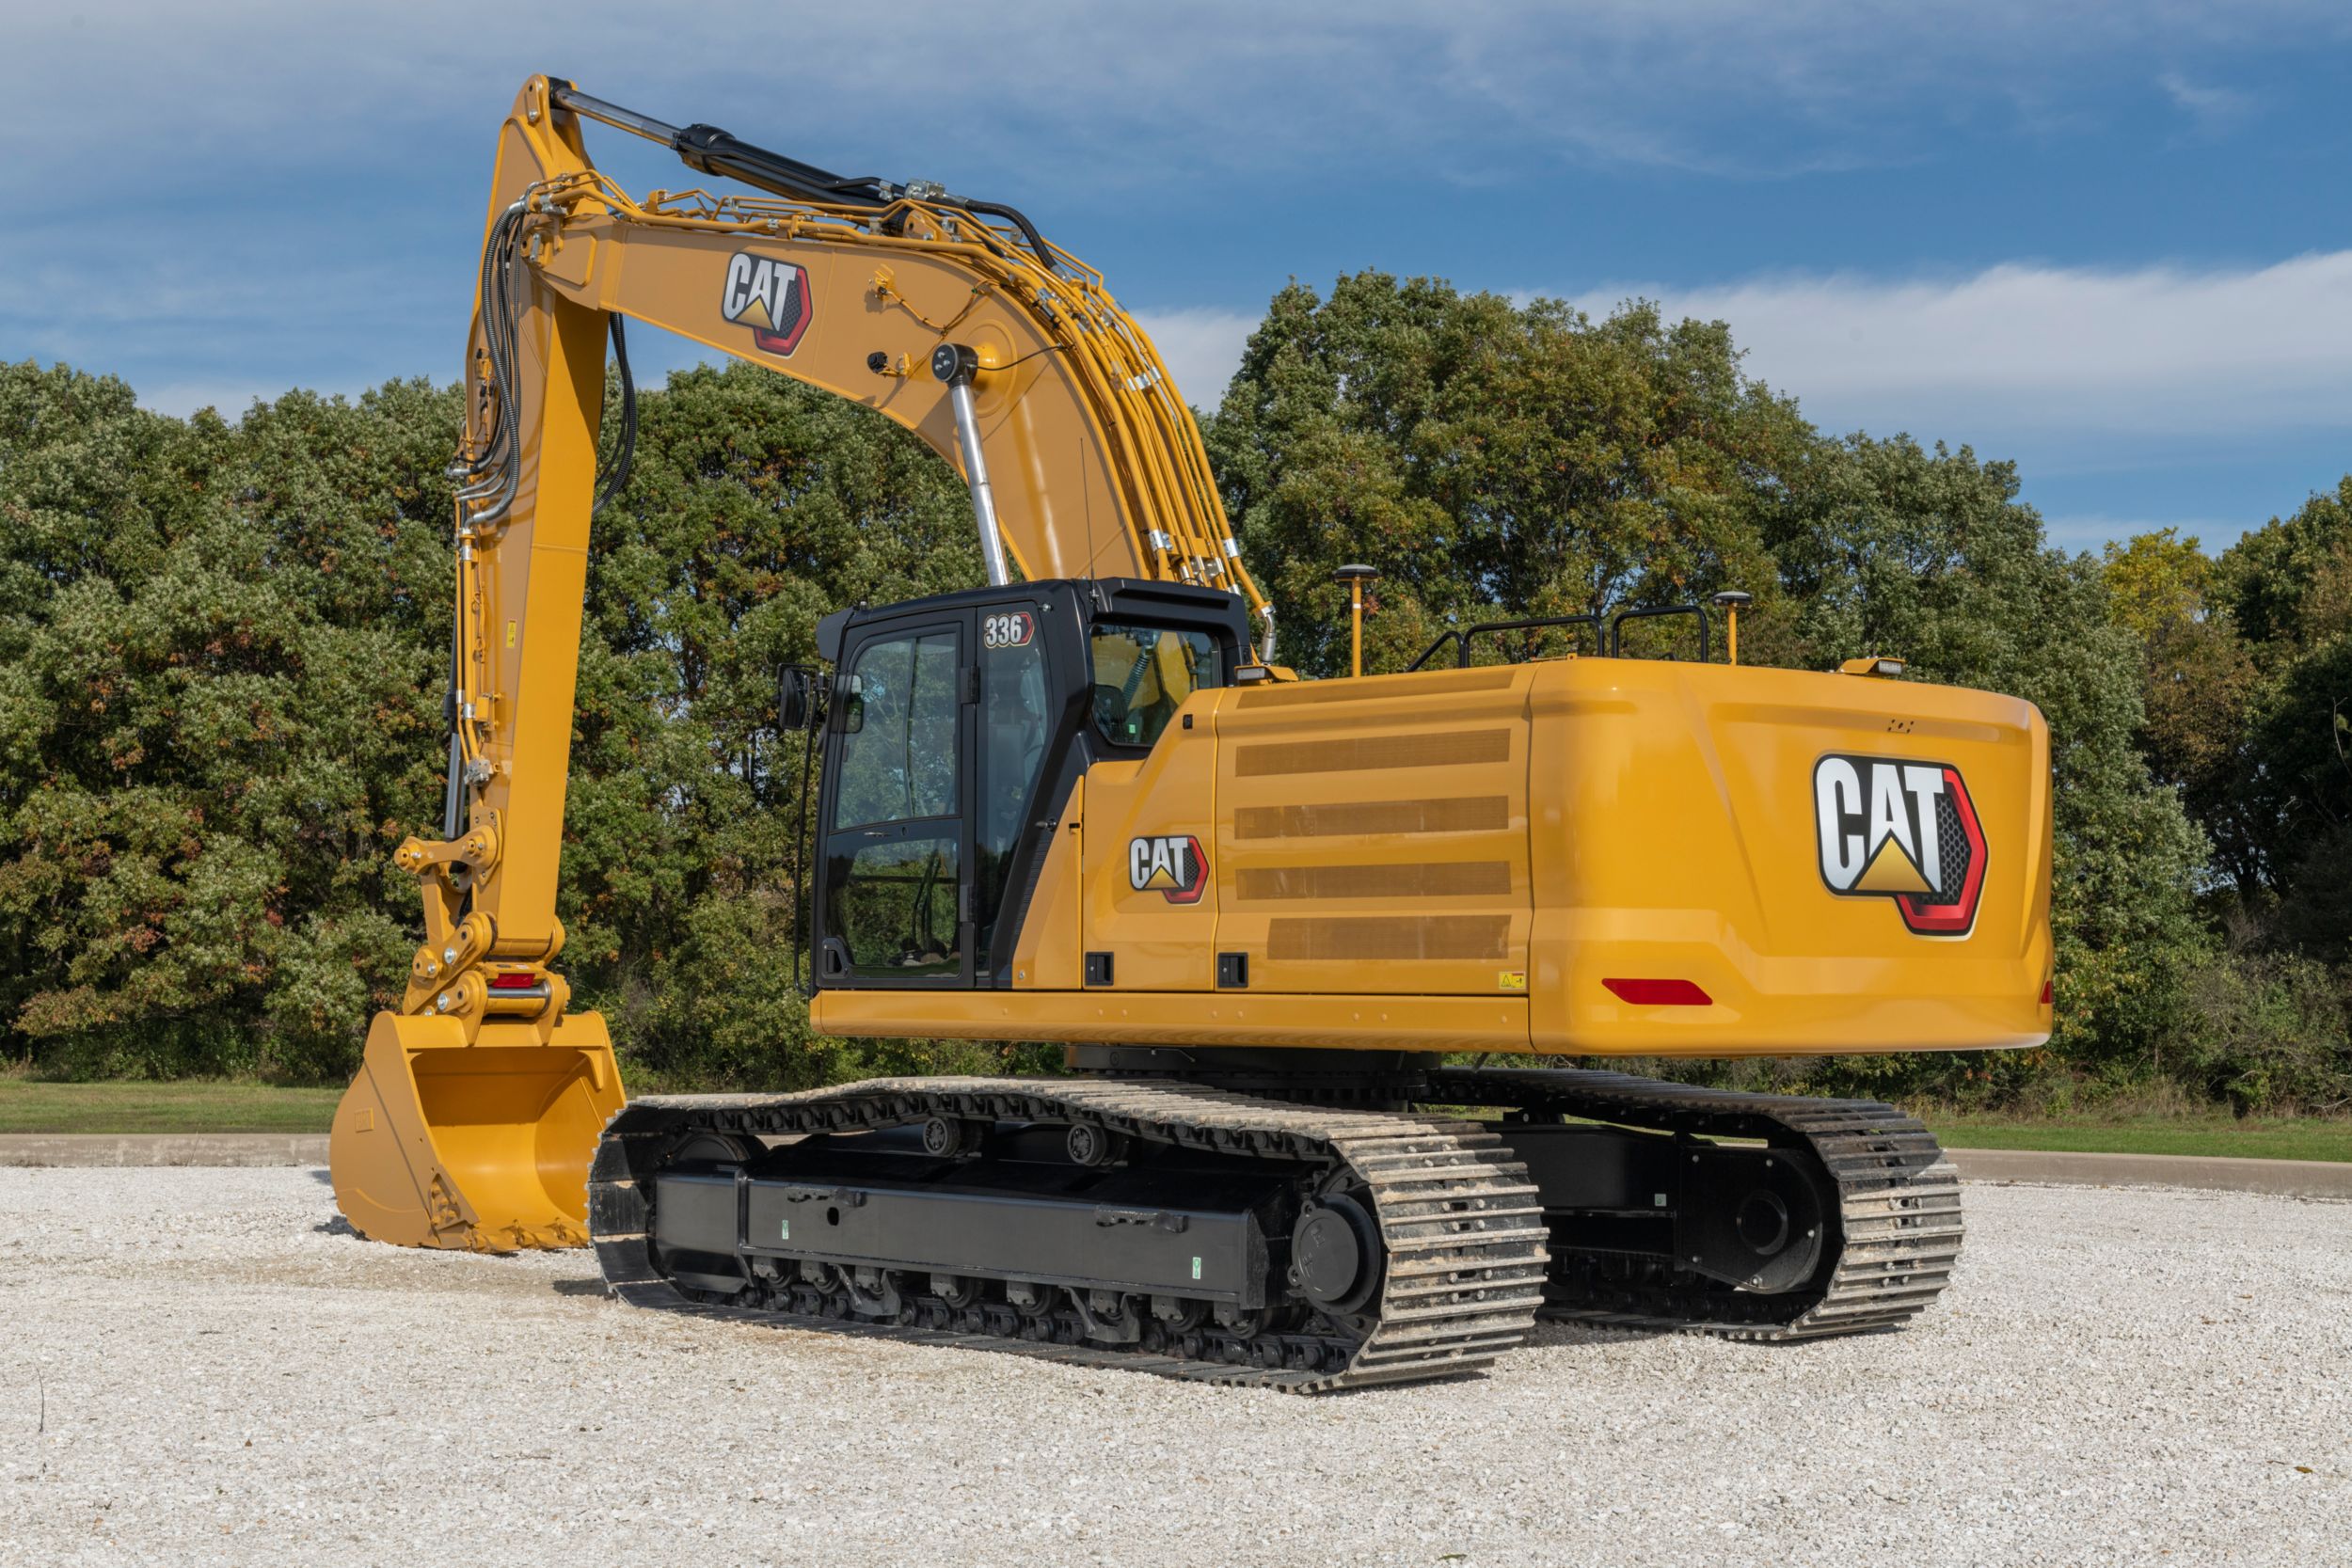 New Cat® 336 excavator delivers classleading productivity and low